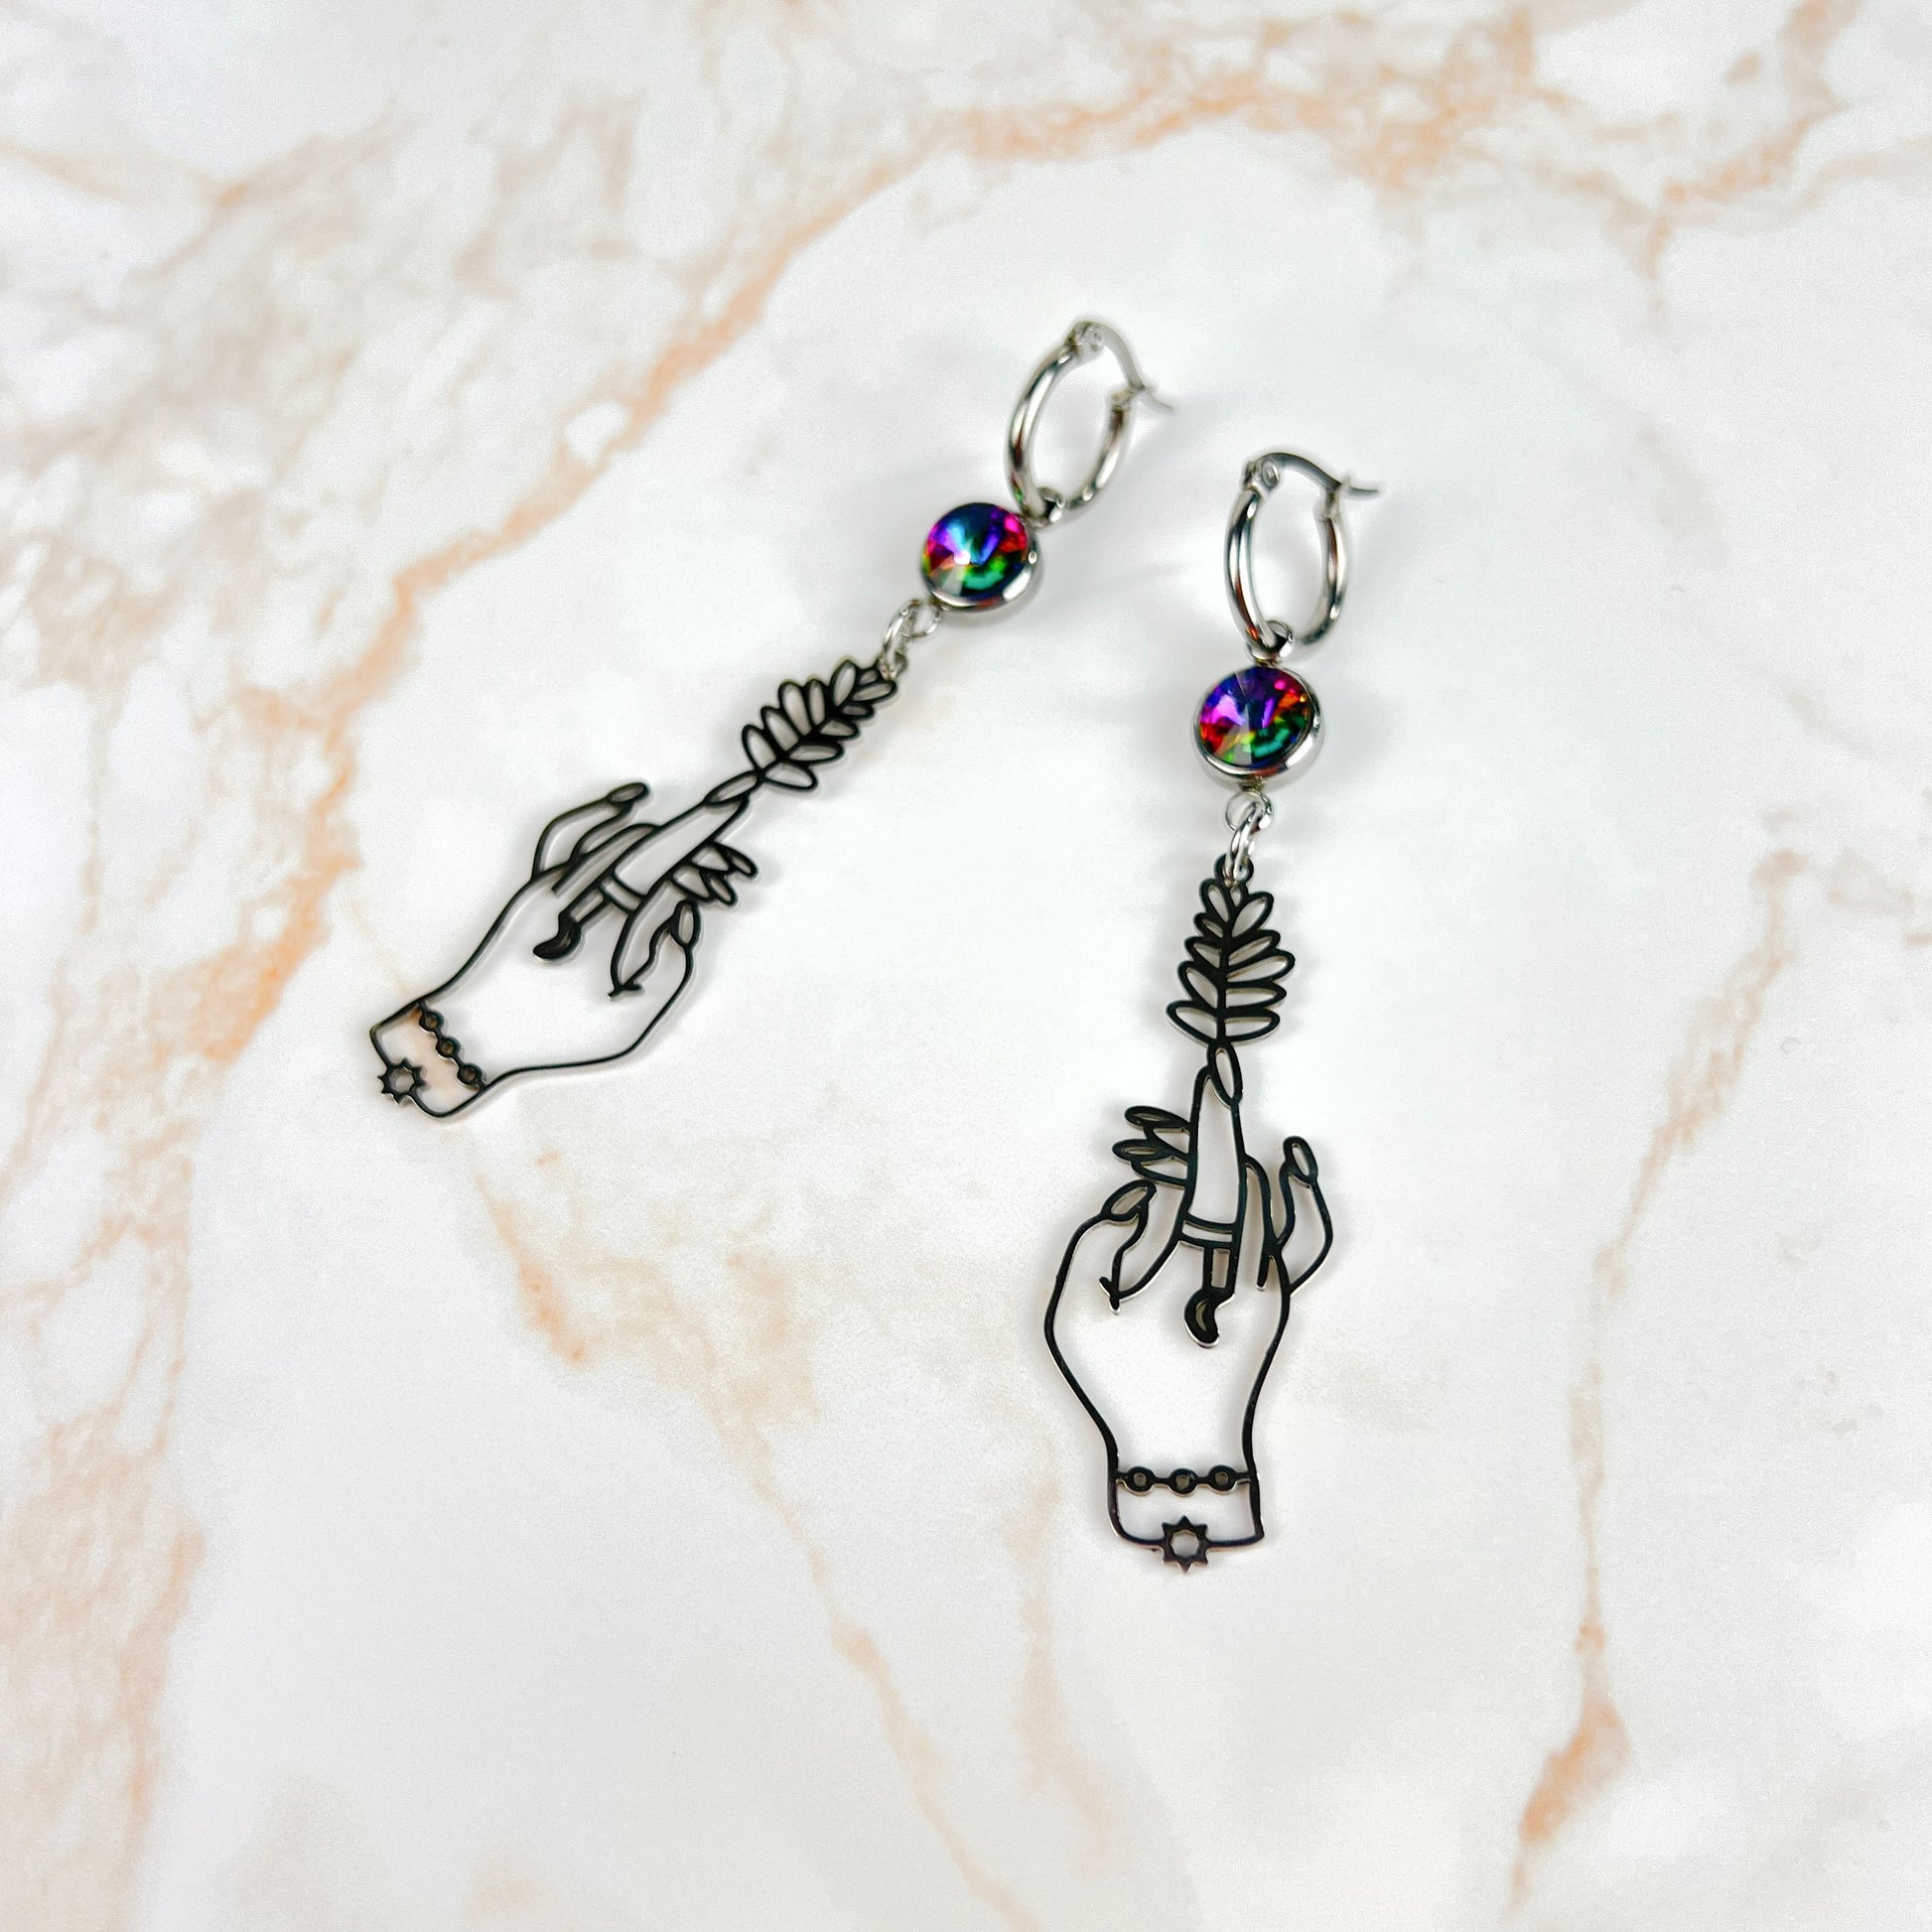 Witch hands earrings with colorful rhinestones made of stainless steel Baguette Magick